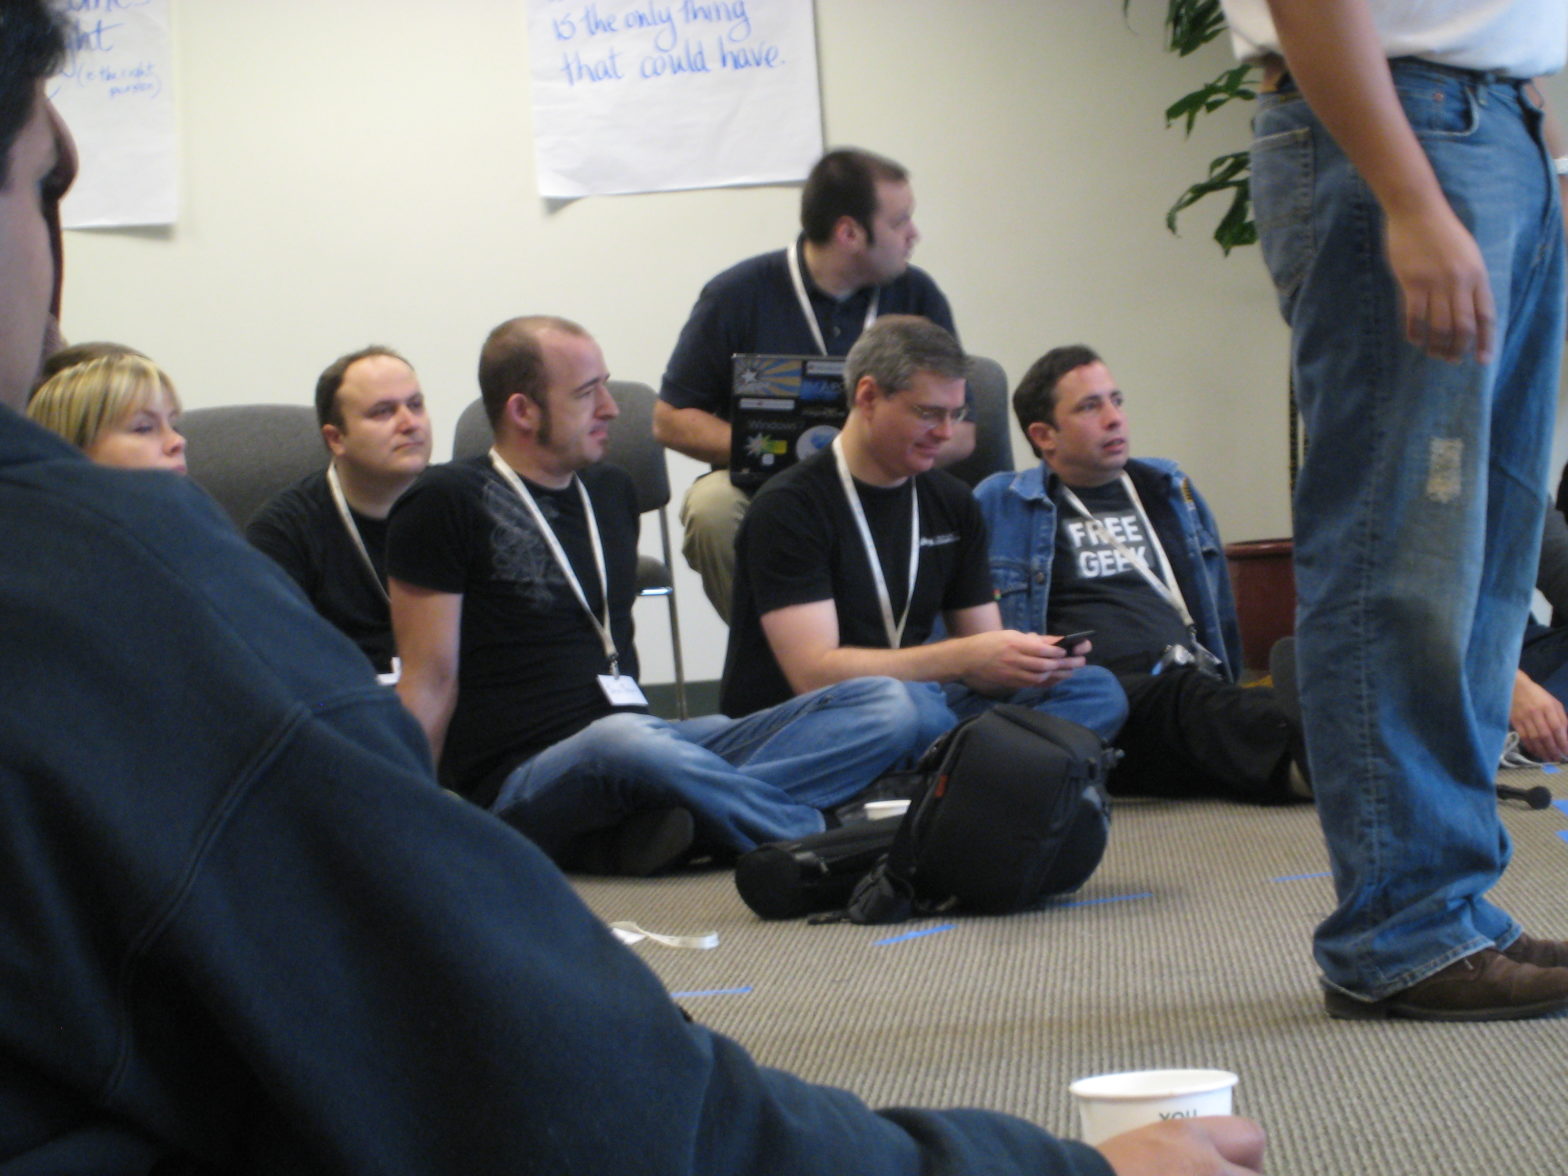 Jono Bacon and others seated on a conference room floor